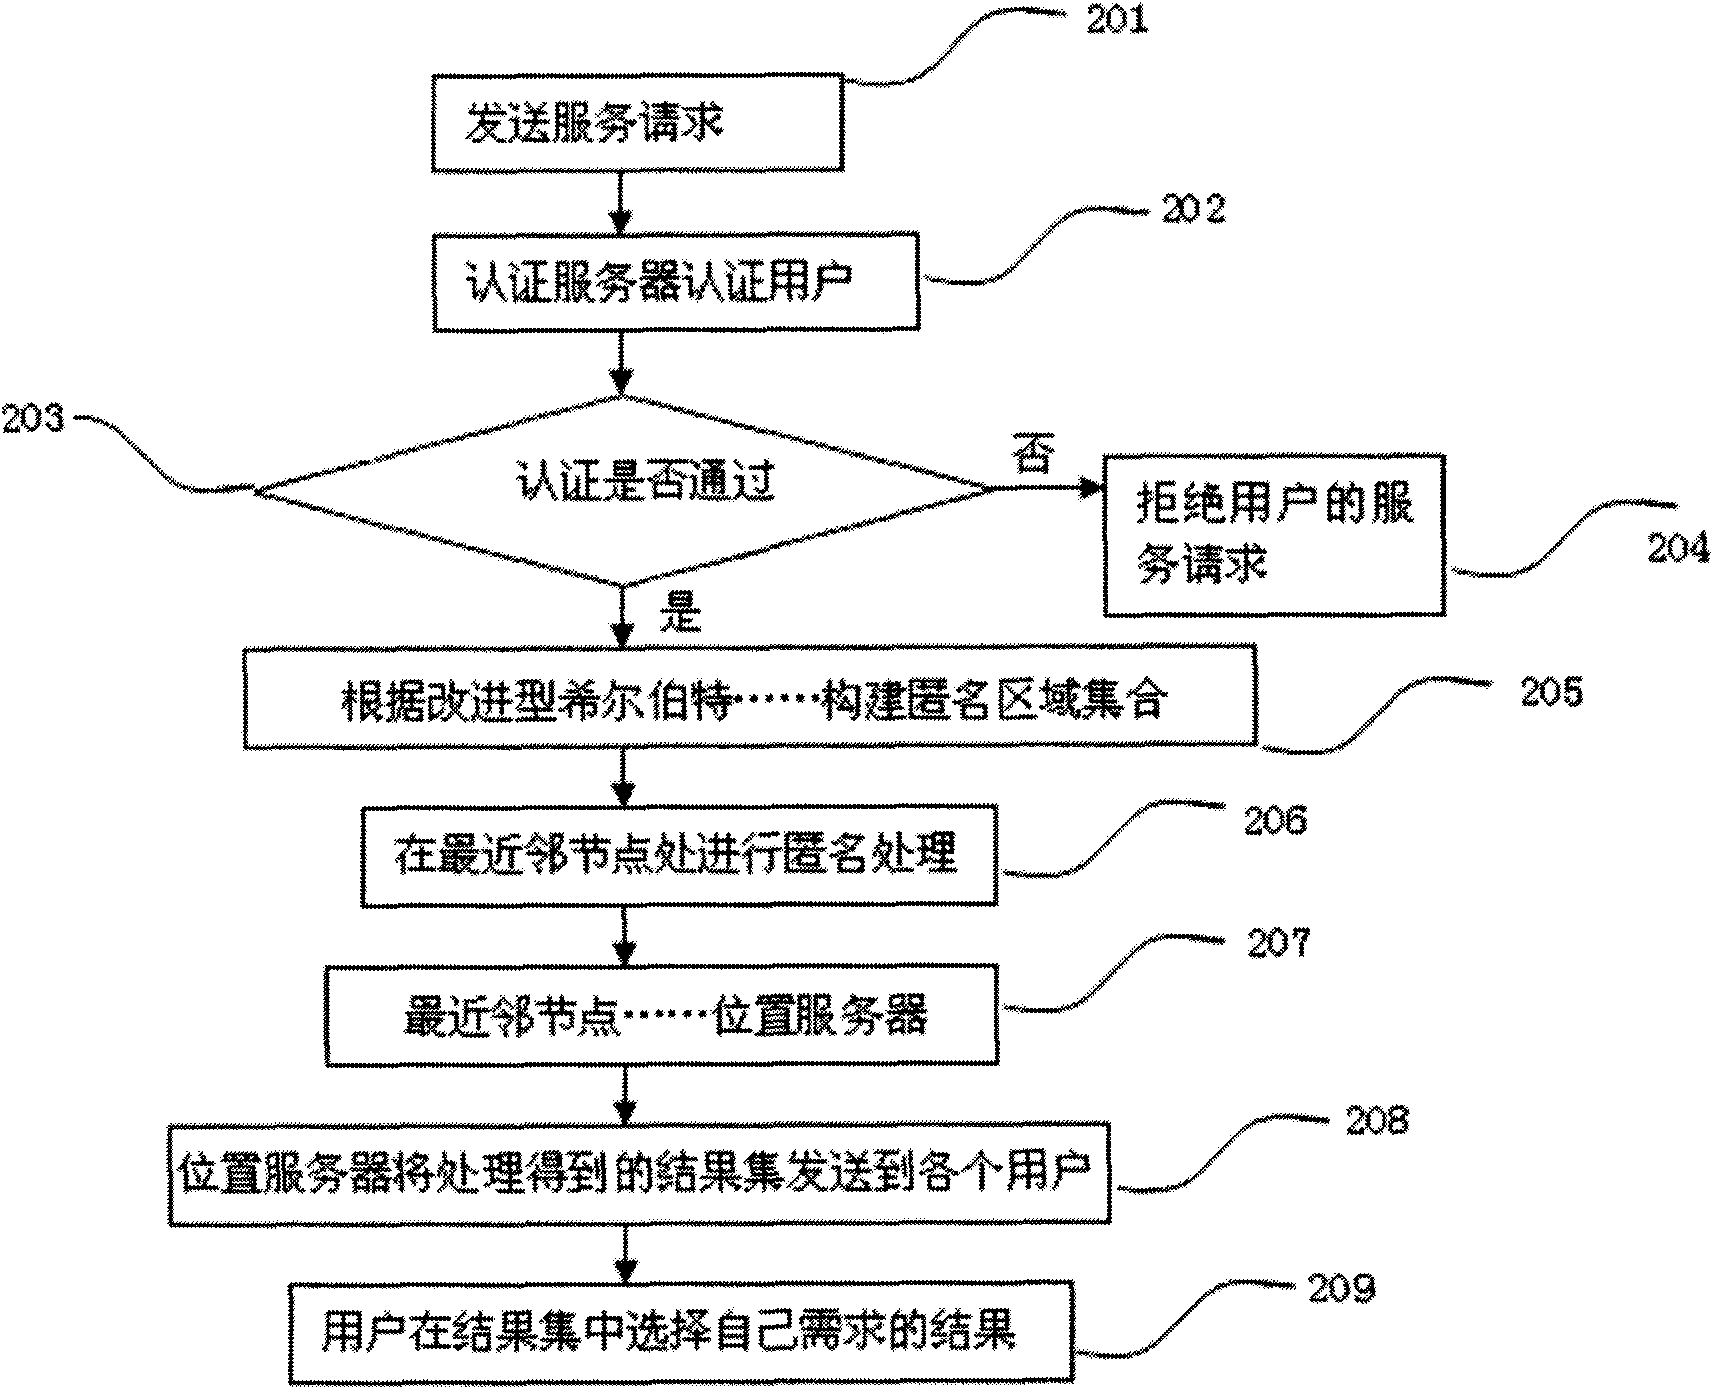 Method for protecting track privacy by forwarding inquiries based on neighboring nodes in location service